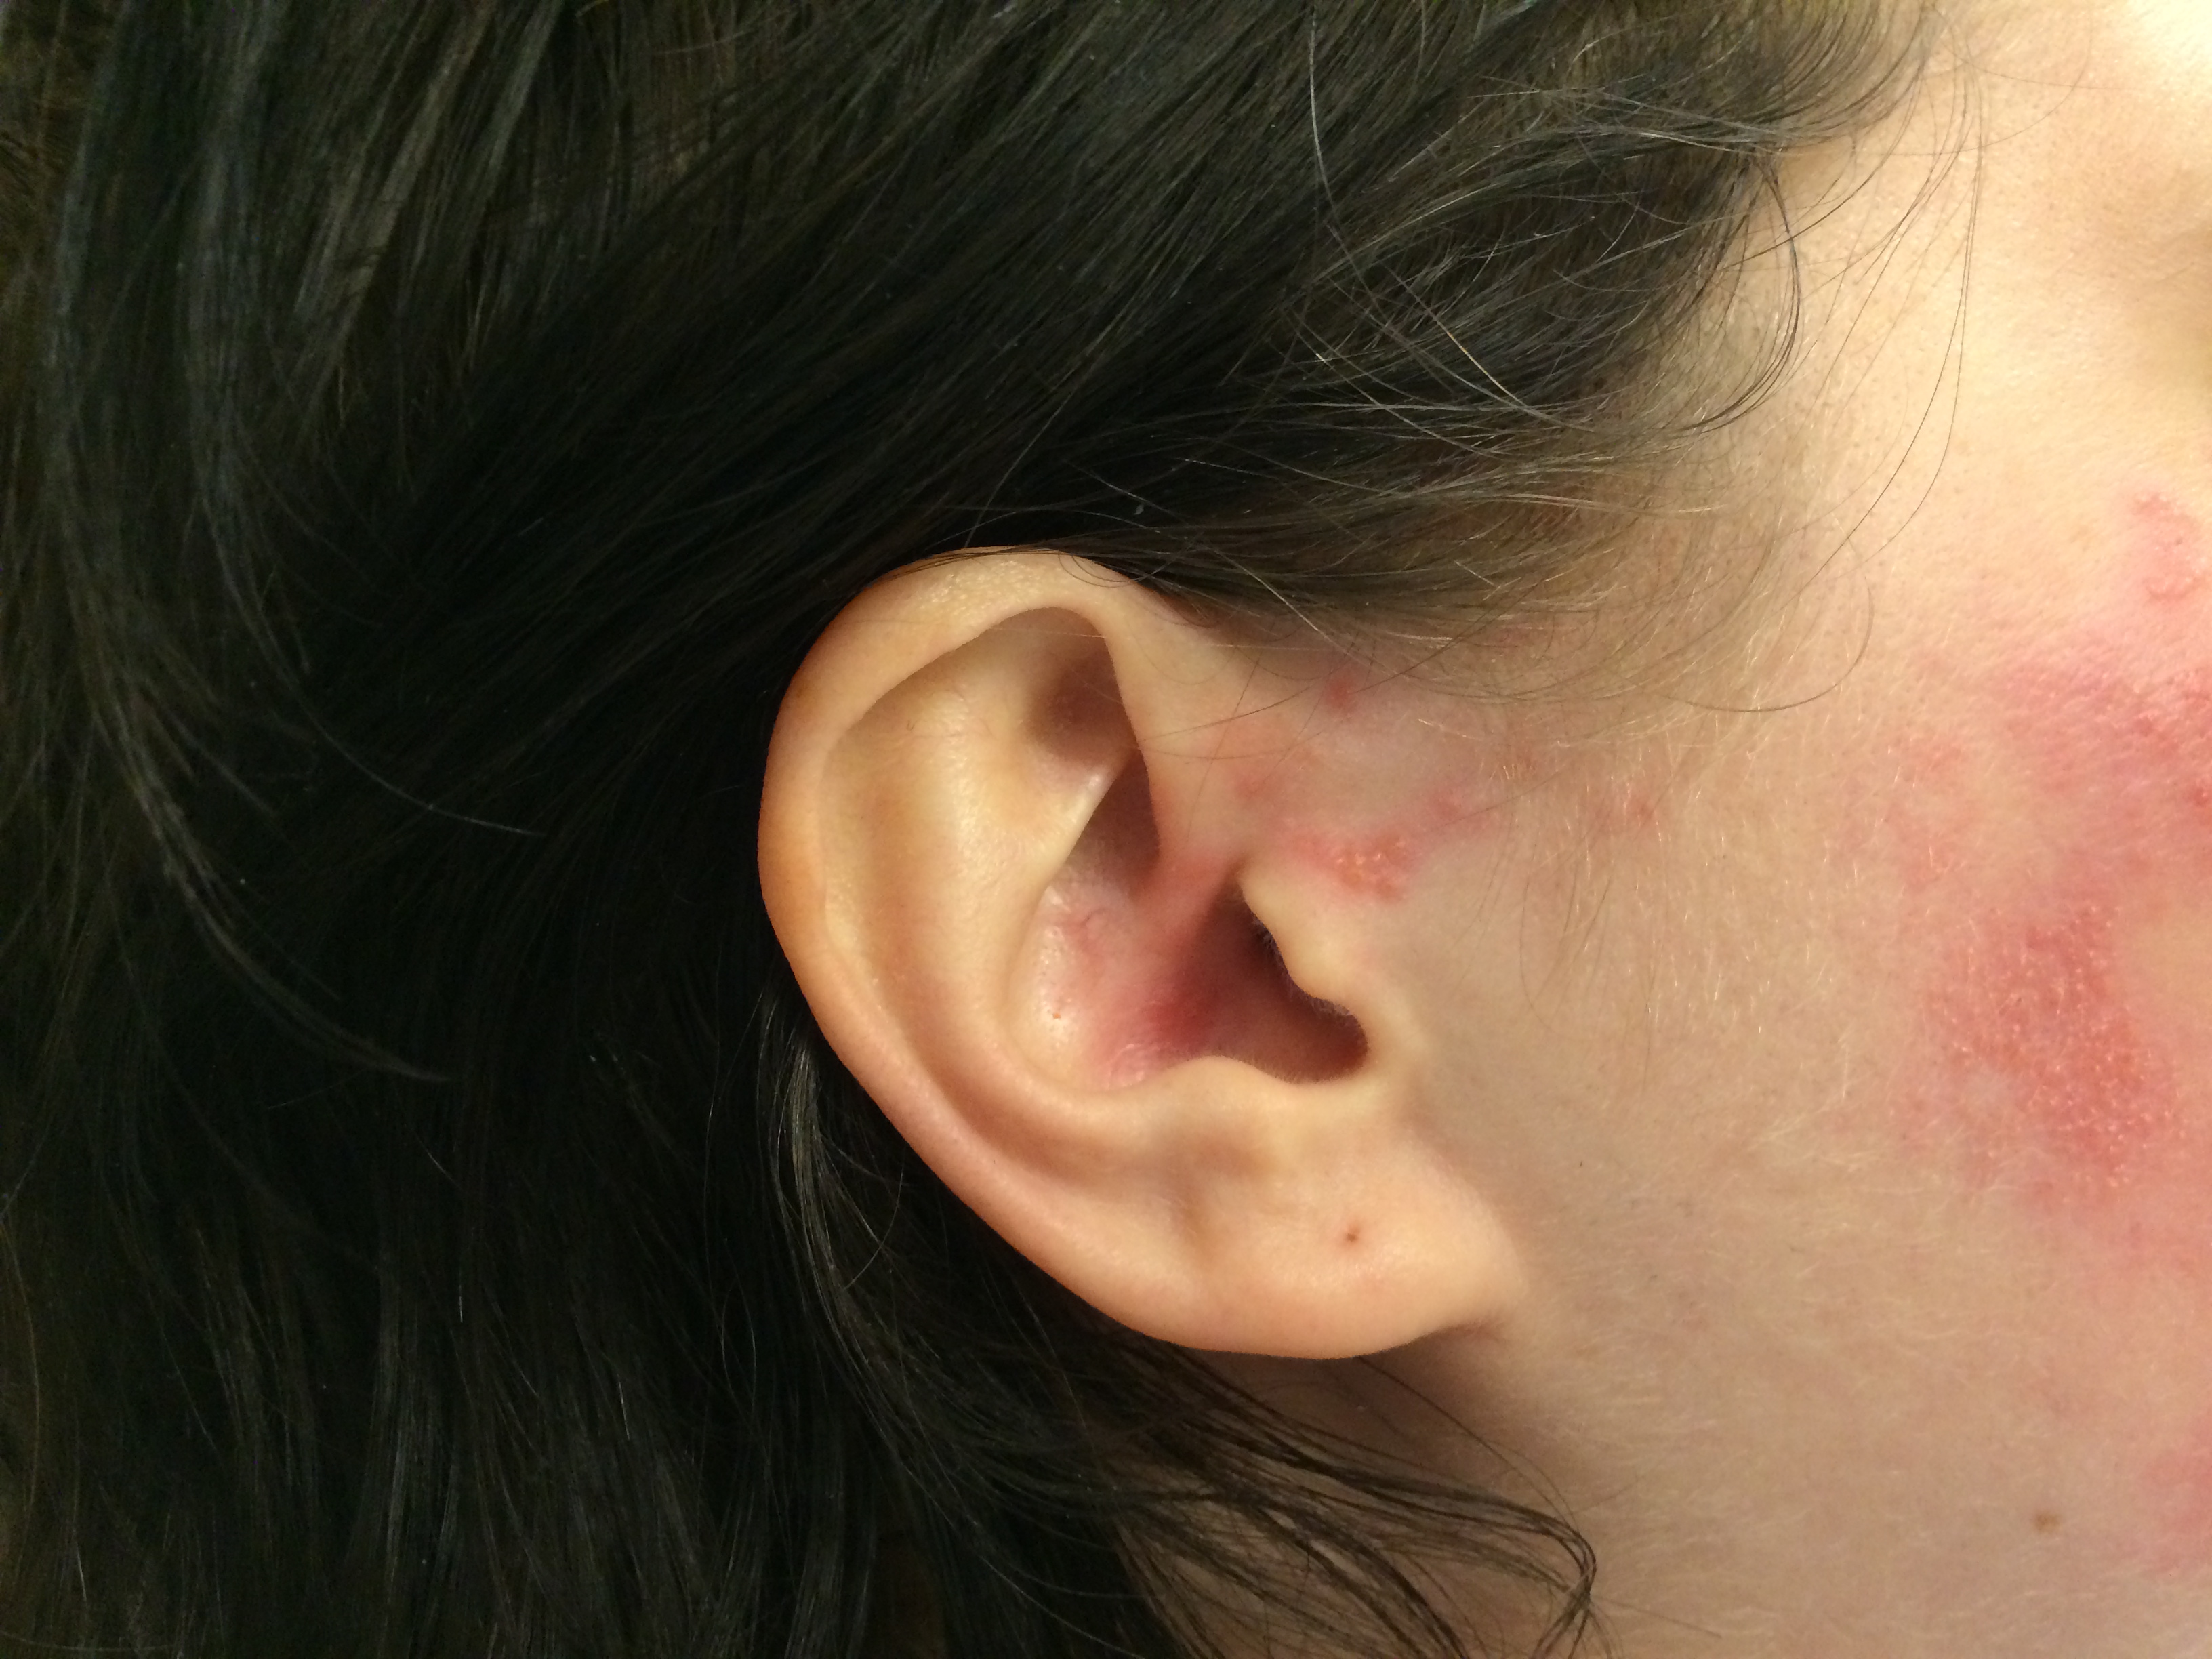 vesicular rash extending to the auricle with facial droop from Ramsay Hunt Syndrome